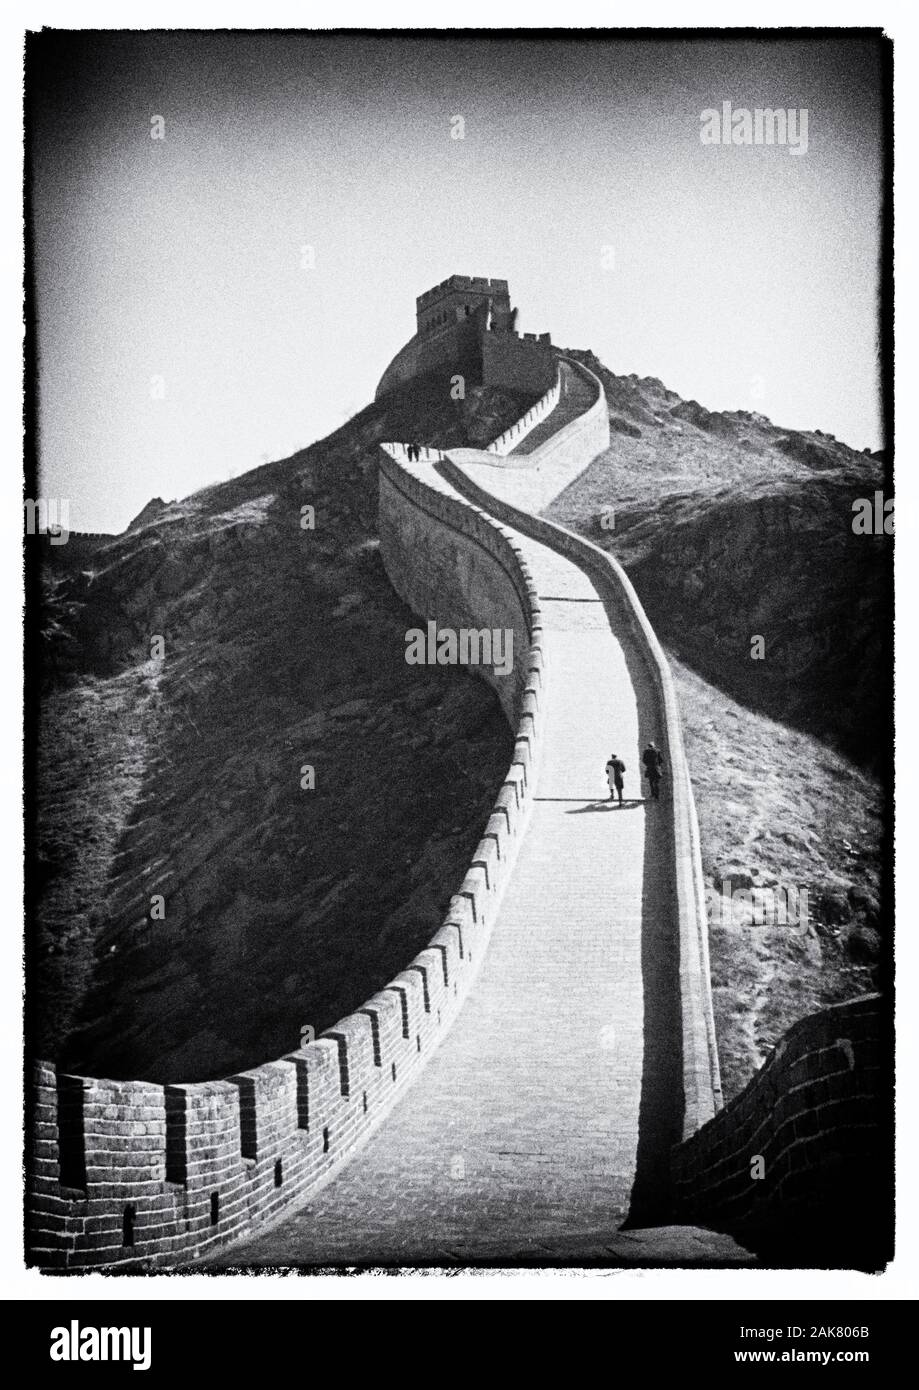 1955 B&W photo - The Great Wall of China (Chinese: 萬里長城; pinyin: Wànlǐ Chángchéng) is the collective name of a series of fortification systems generally built across the historical northern borders of China to protect and consolidate territories of Chinese states and empires against various nomadic groups of the steppe and their polities. Several walls were being built from as early as the 7th century BC by ancient Chinese states; selective stretches were later joined together by Qin Shi Huang (220–206 BC), the first Emperor of China. Stock Photo